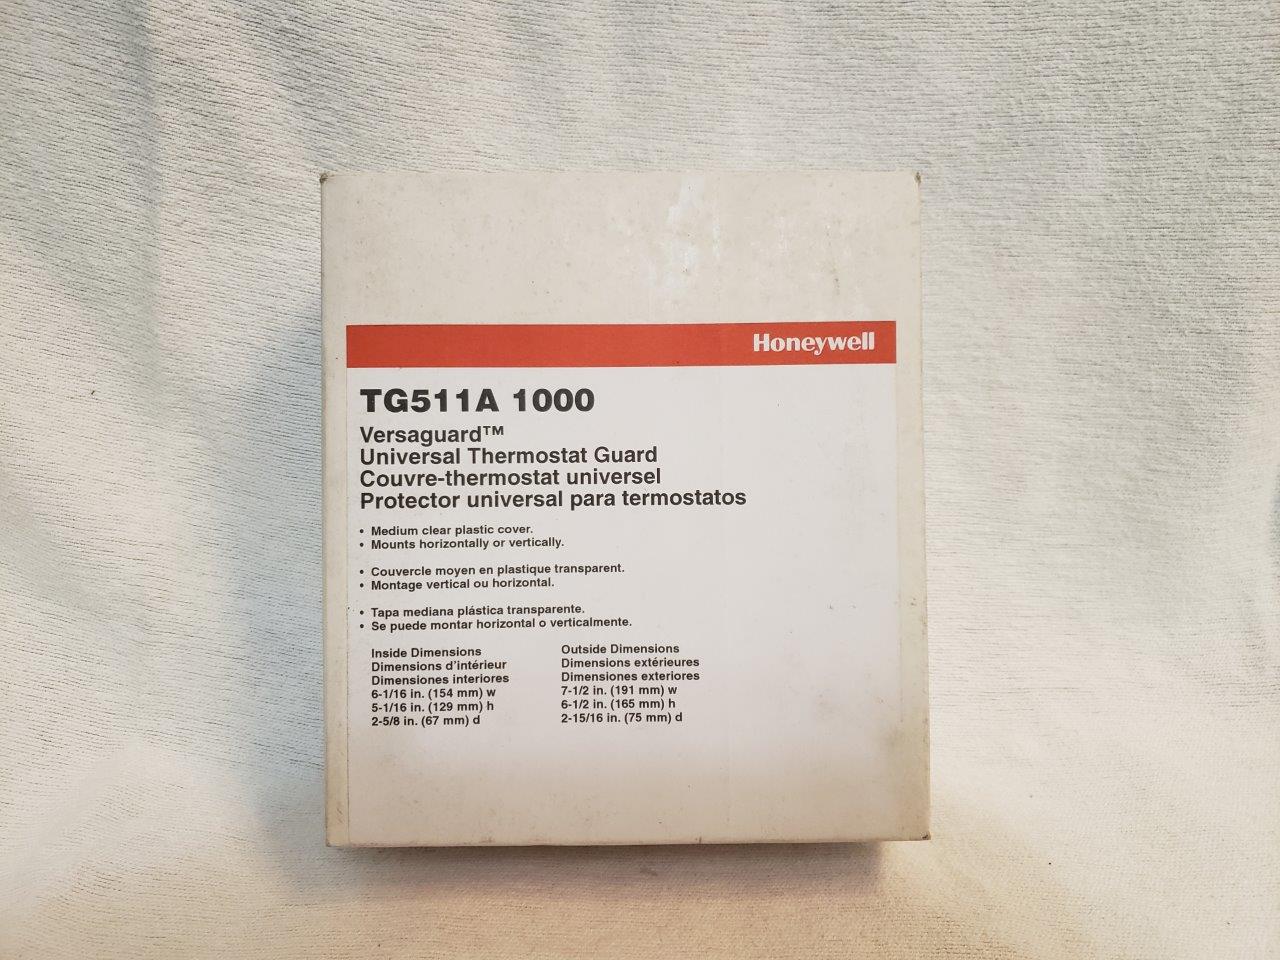 Honeywell Tg511a 1000 Versaguard Universal Thermostat Guard TG511A1000 for sale online 